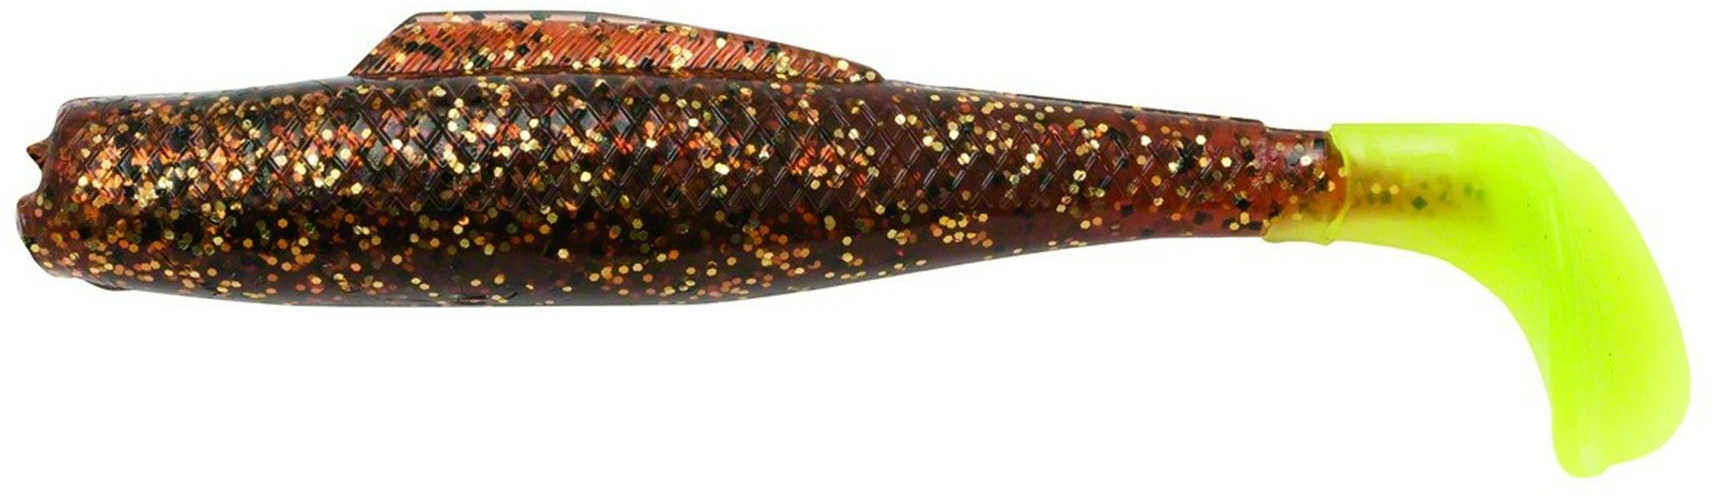 Z-Man Minniwz Soft {Plastic Lures 3" Length, Rootbeer/Chartreuse Tail, Package of 6